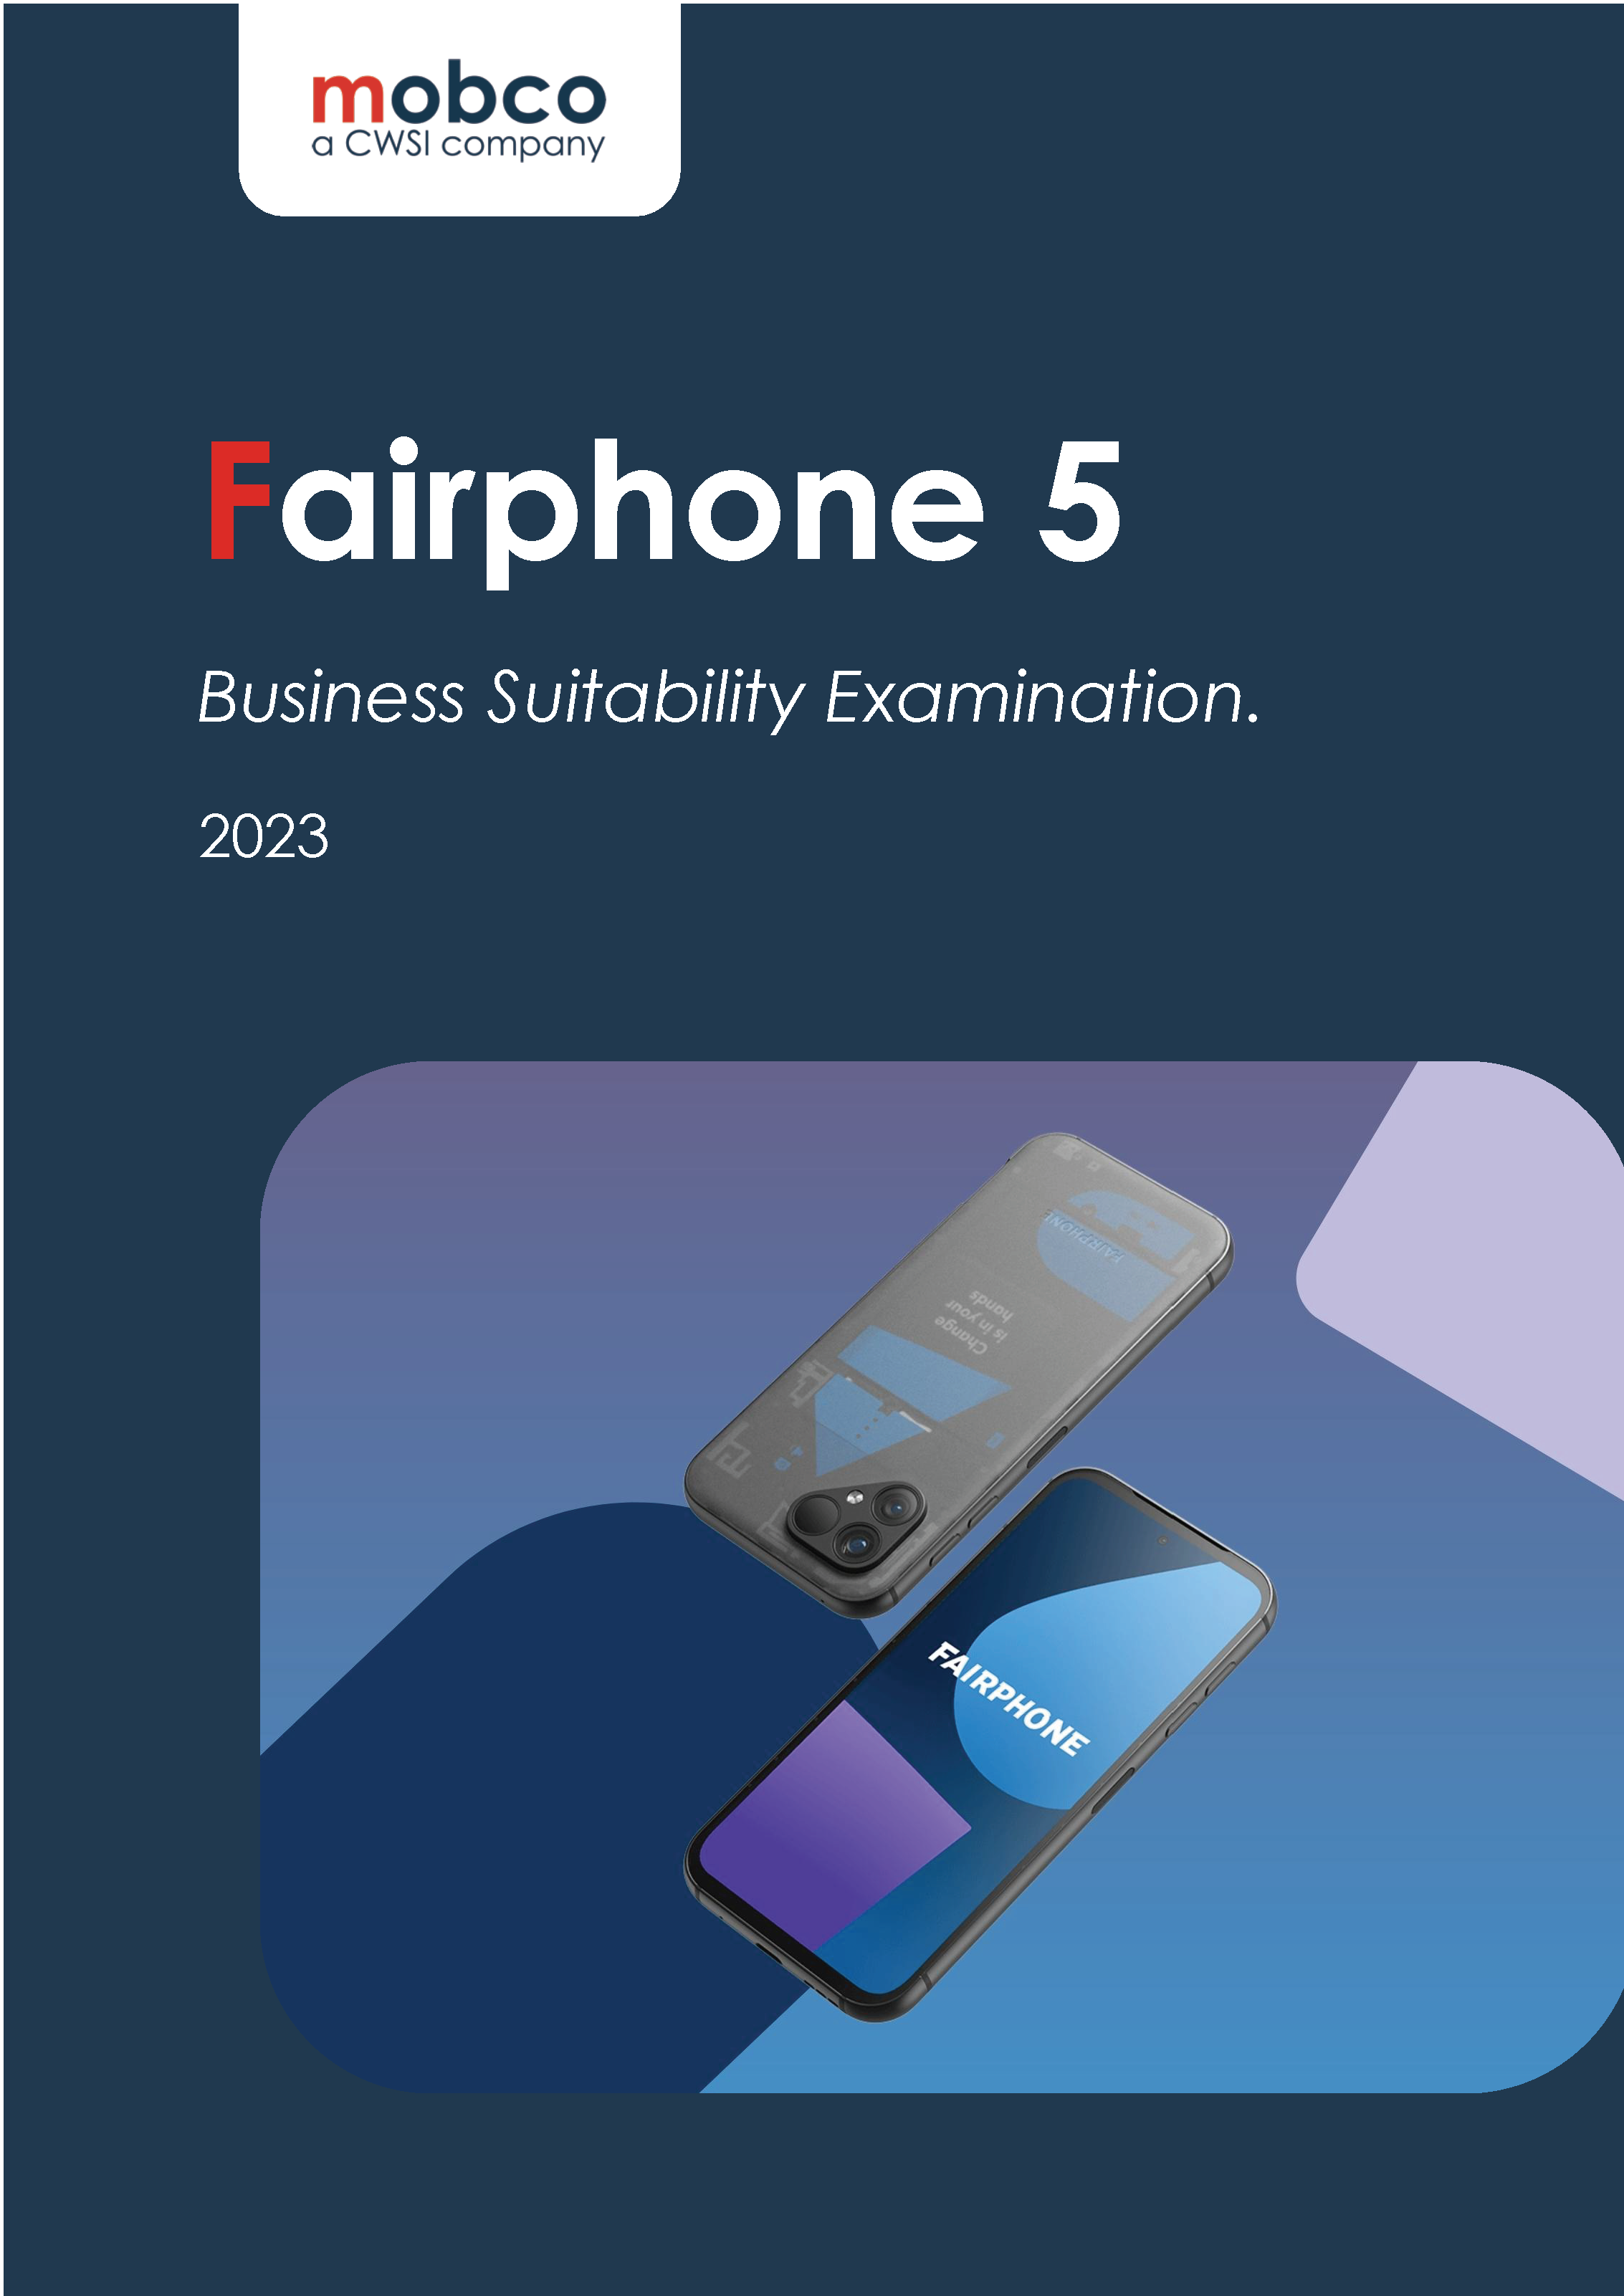 mobco's Fairphone 5 Business Suitability Examination